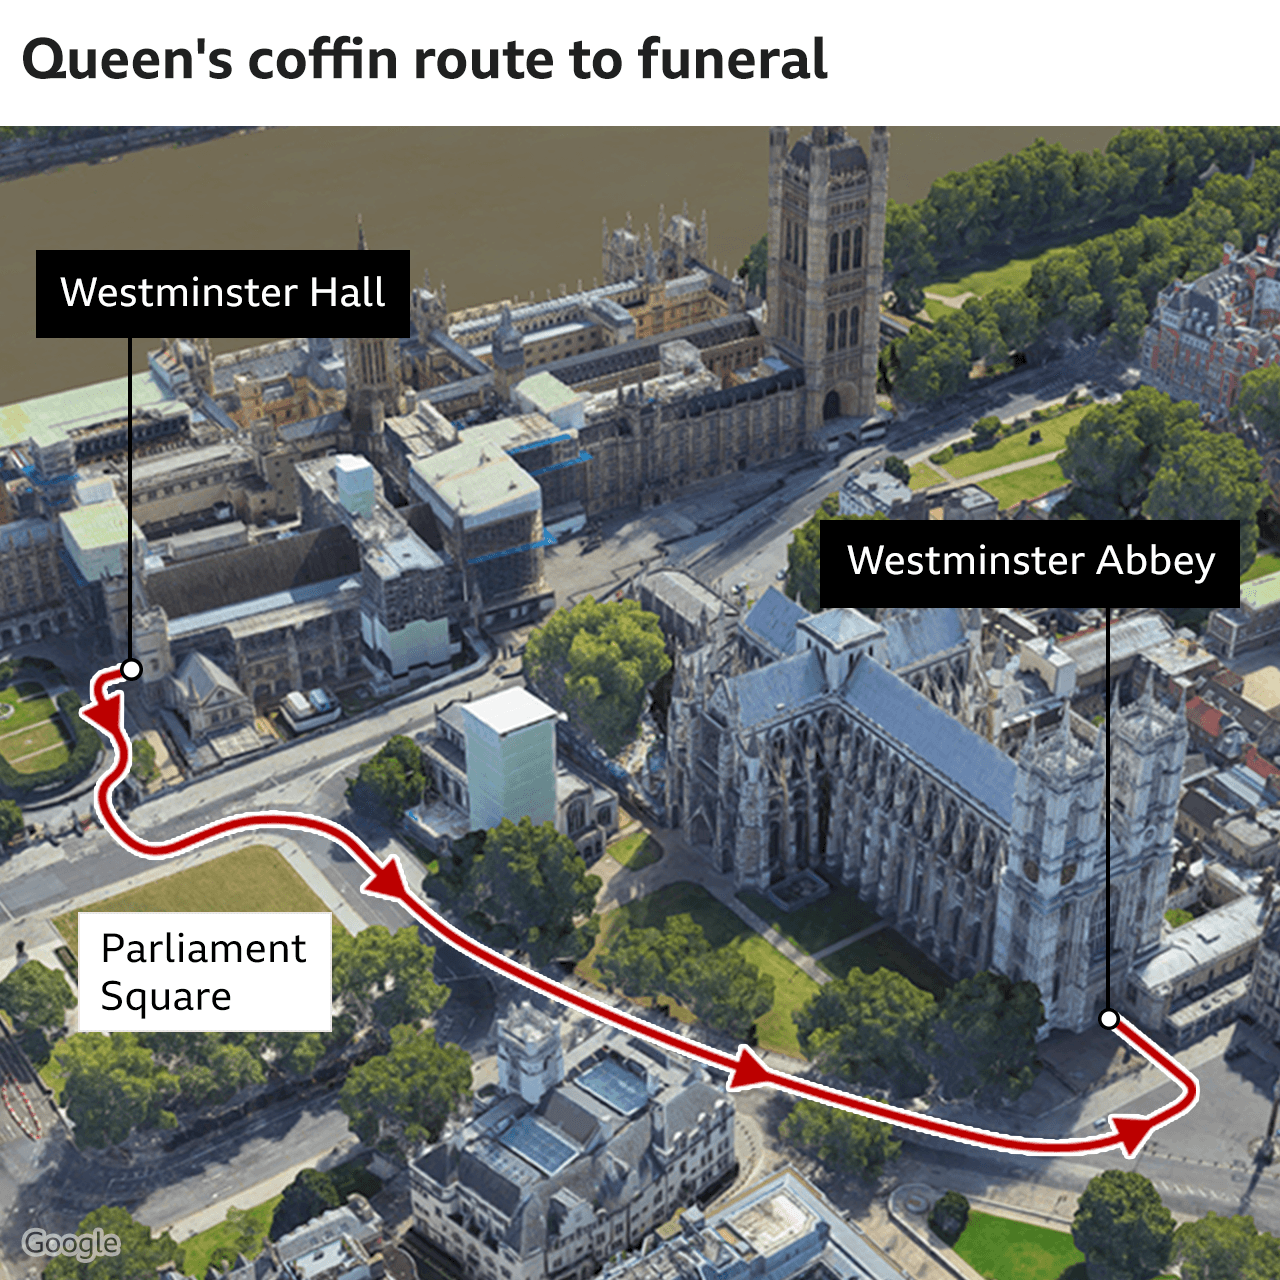 Map showing route the Queen's coffin took from Westminster Hall to Westminster Abbey